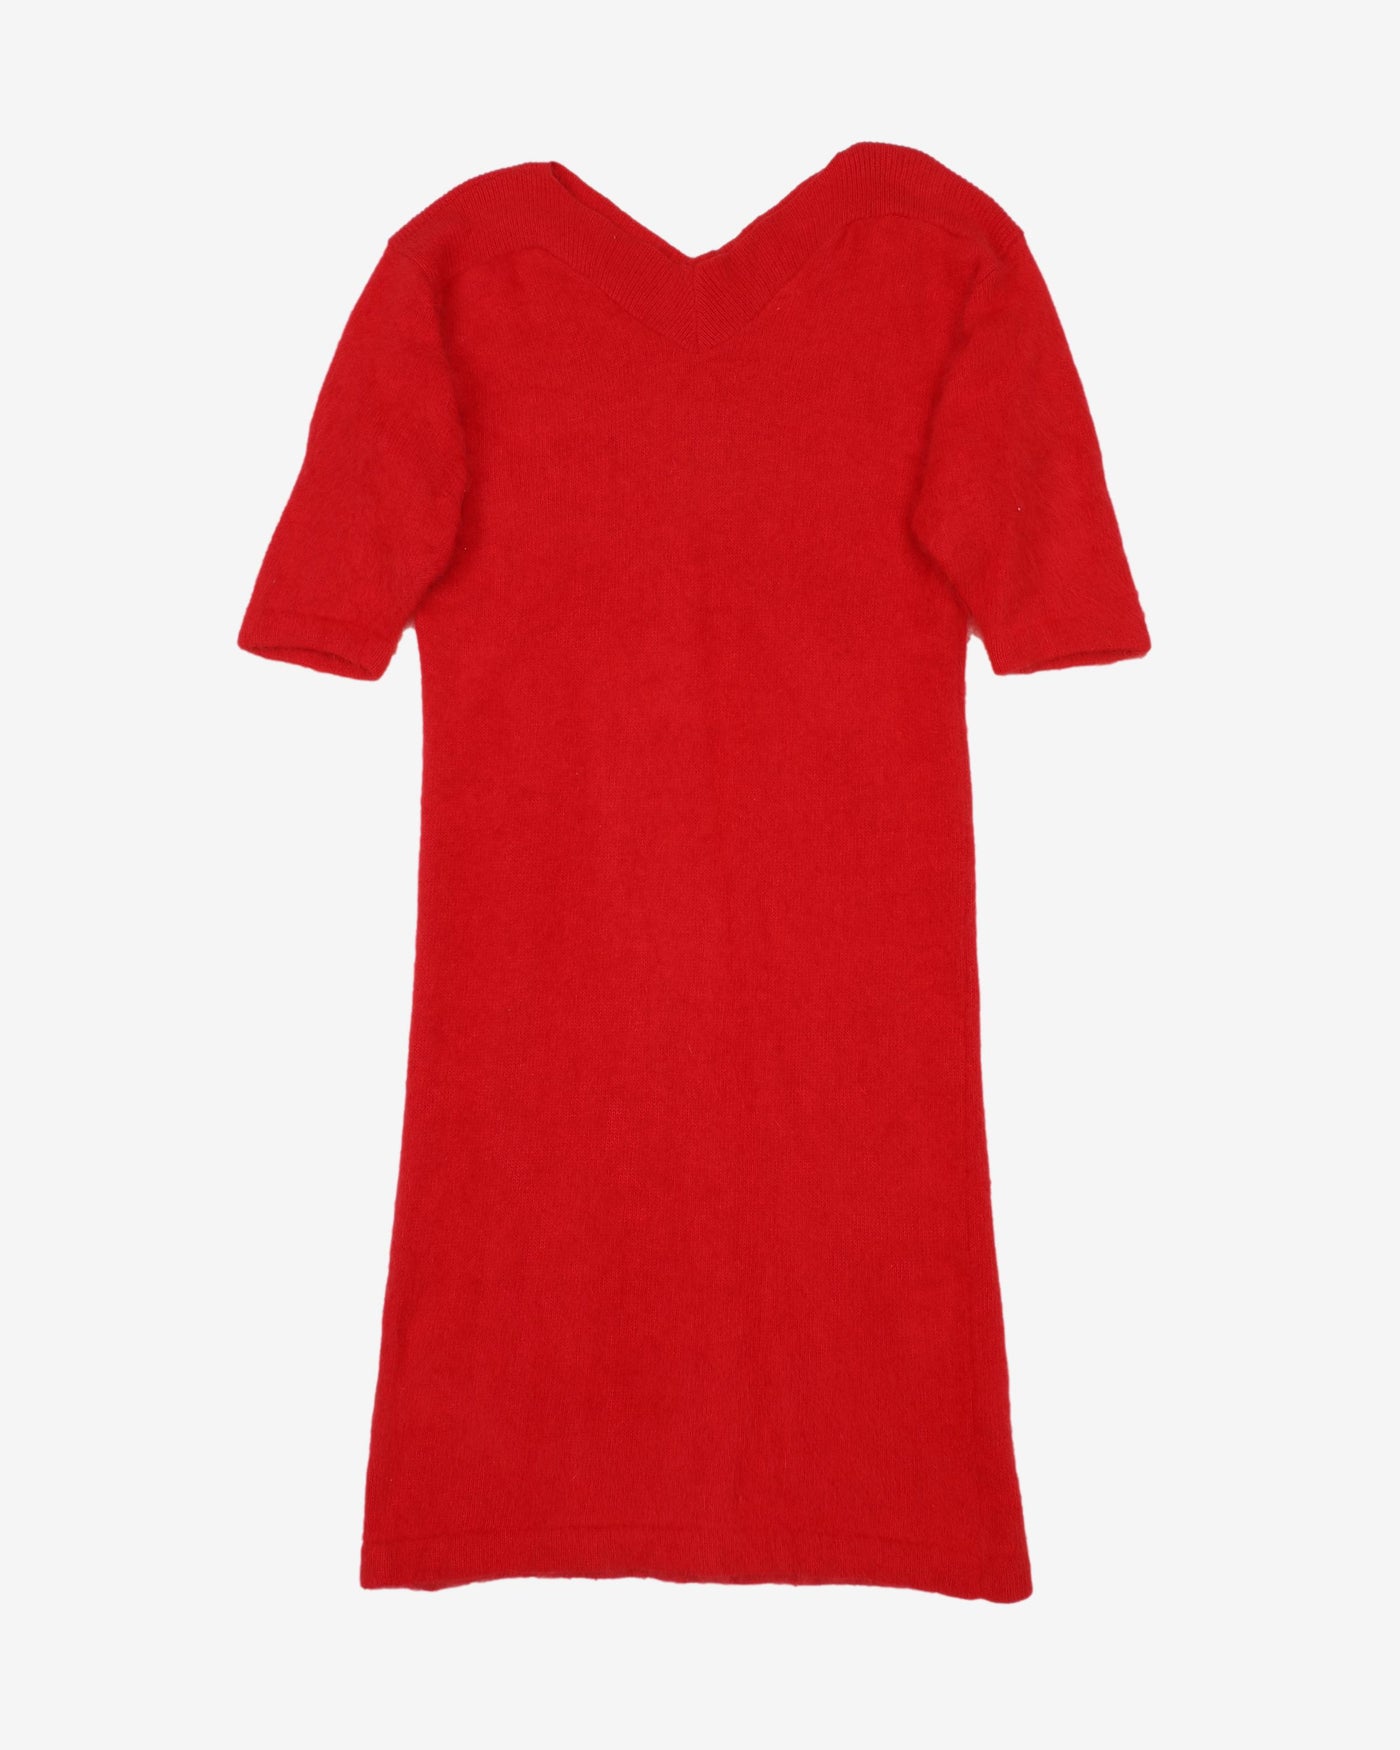 1990s Red Angora Knitted Dress - S